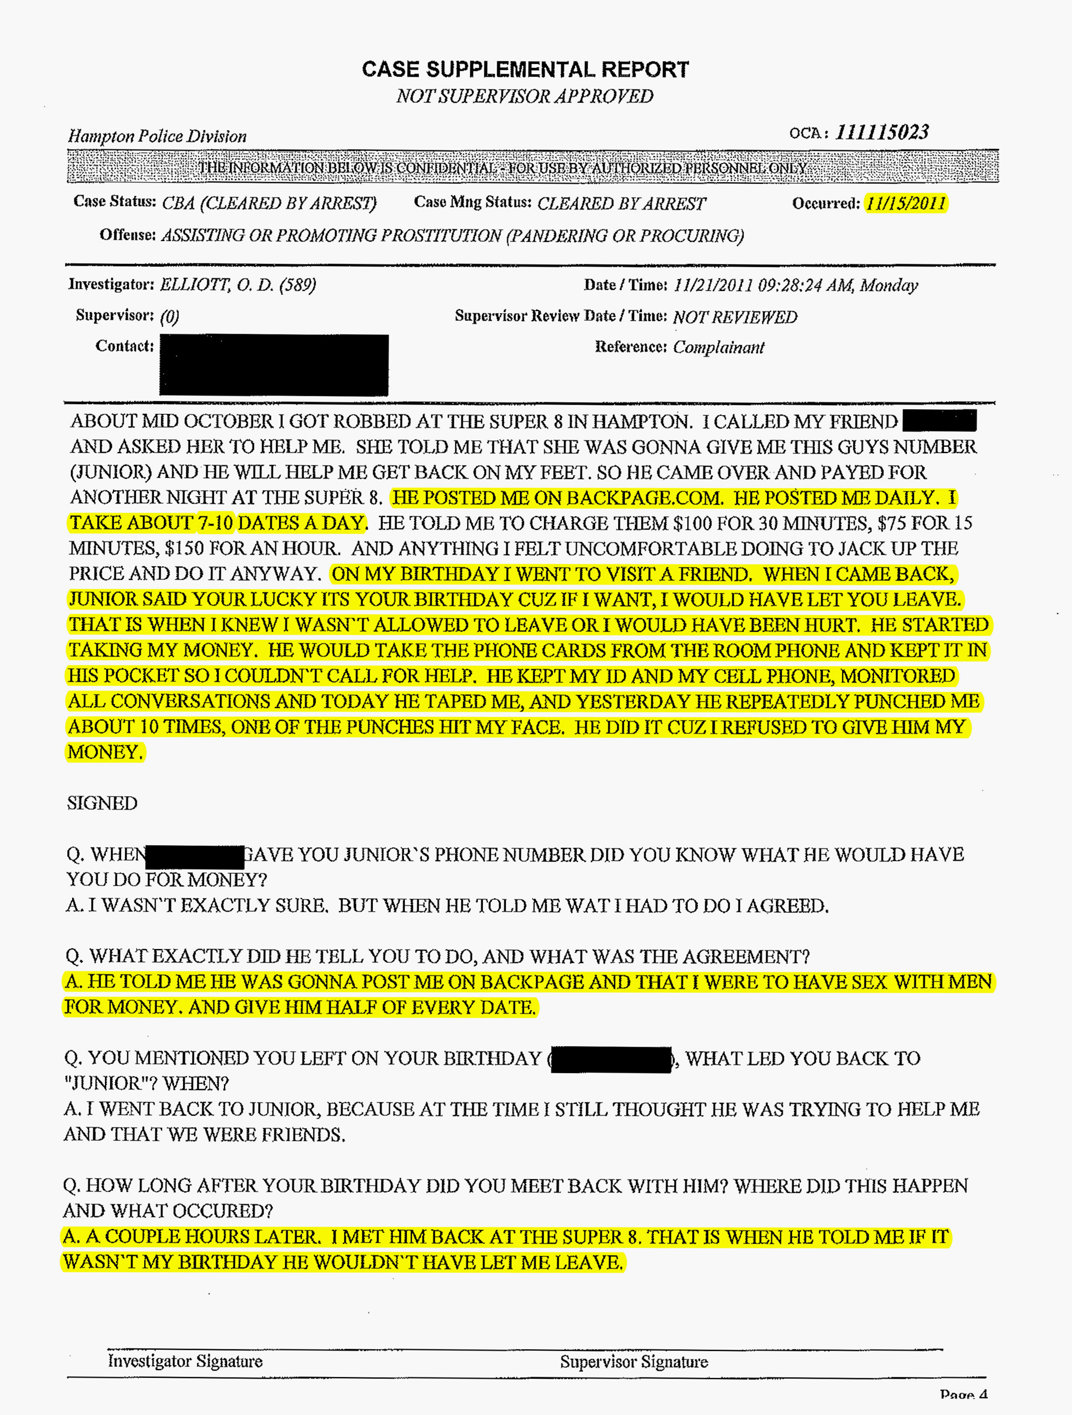 Hampton police report about Ron Miscavige hooker page 5